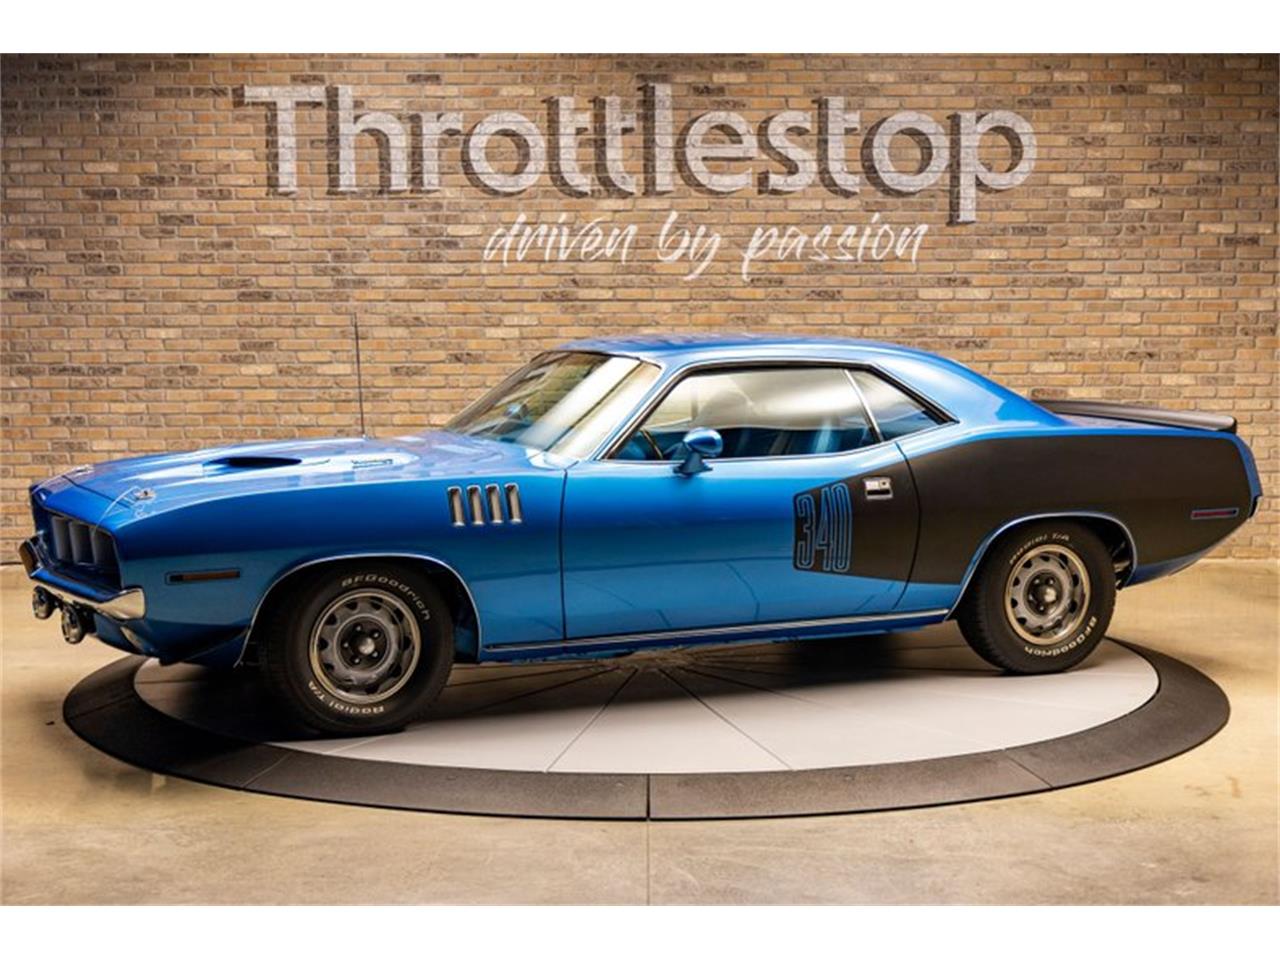 For Sale: 1971 Plymouth Barracuda in Elkhart Lake, Wisconsin for sale in Elkhart Lake, WI